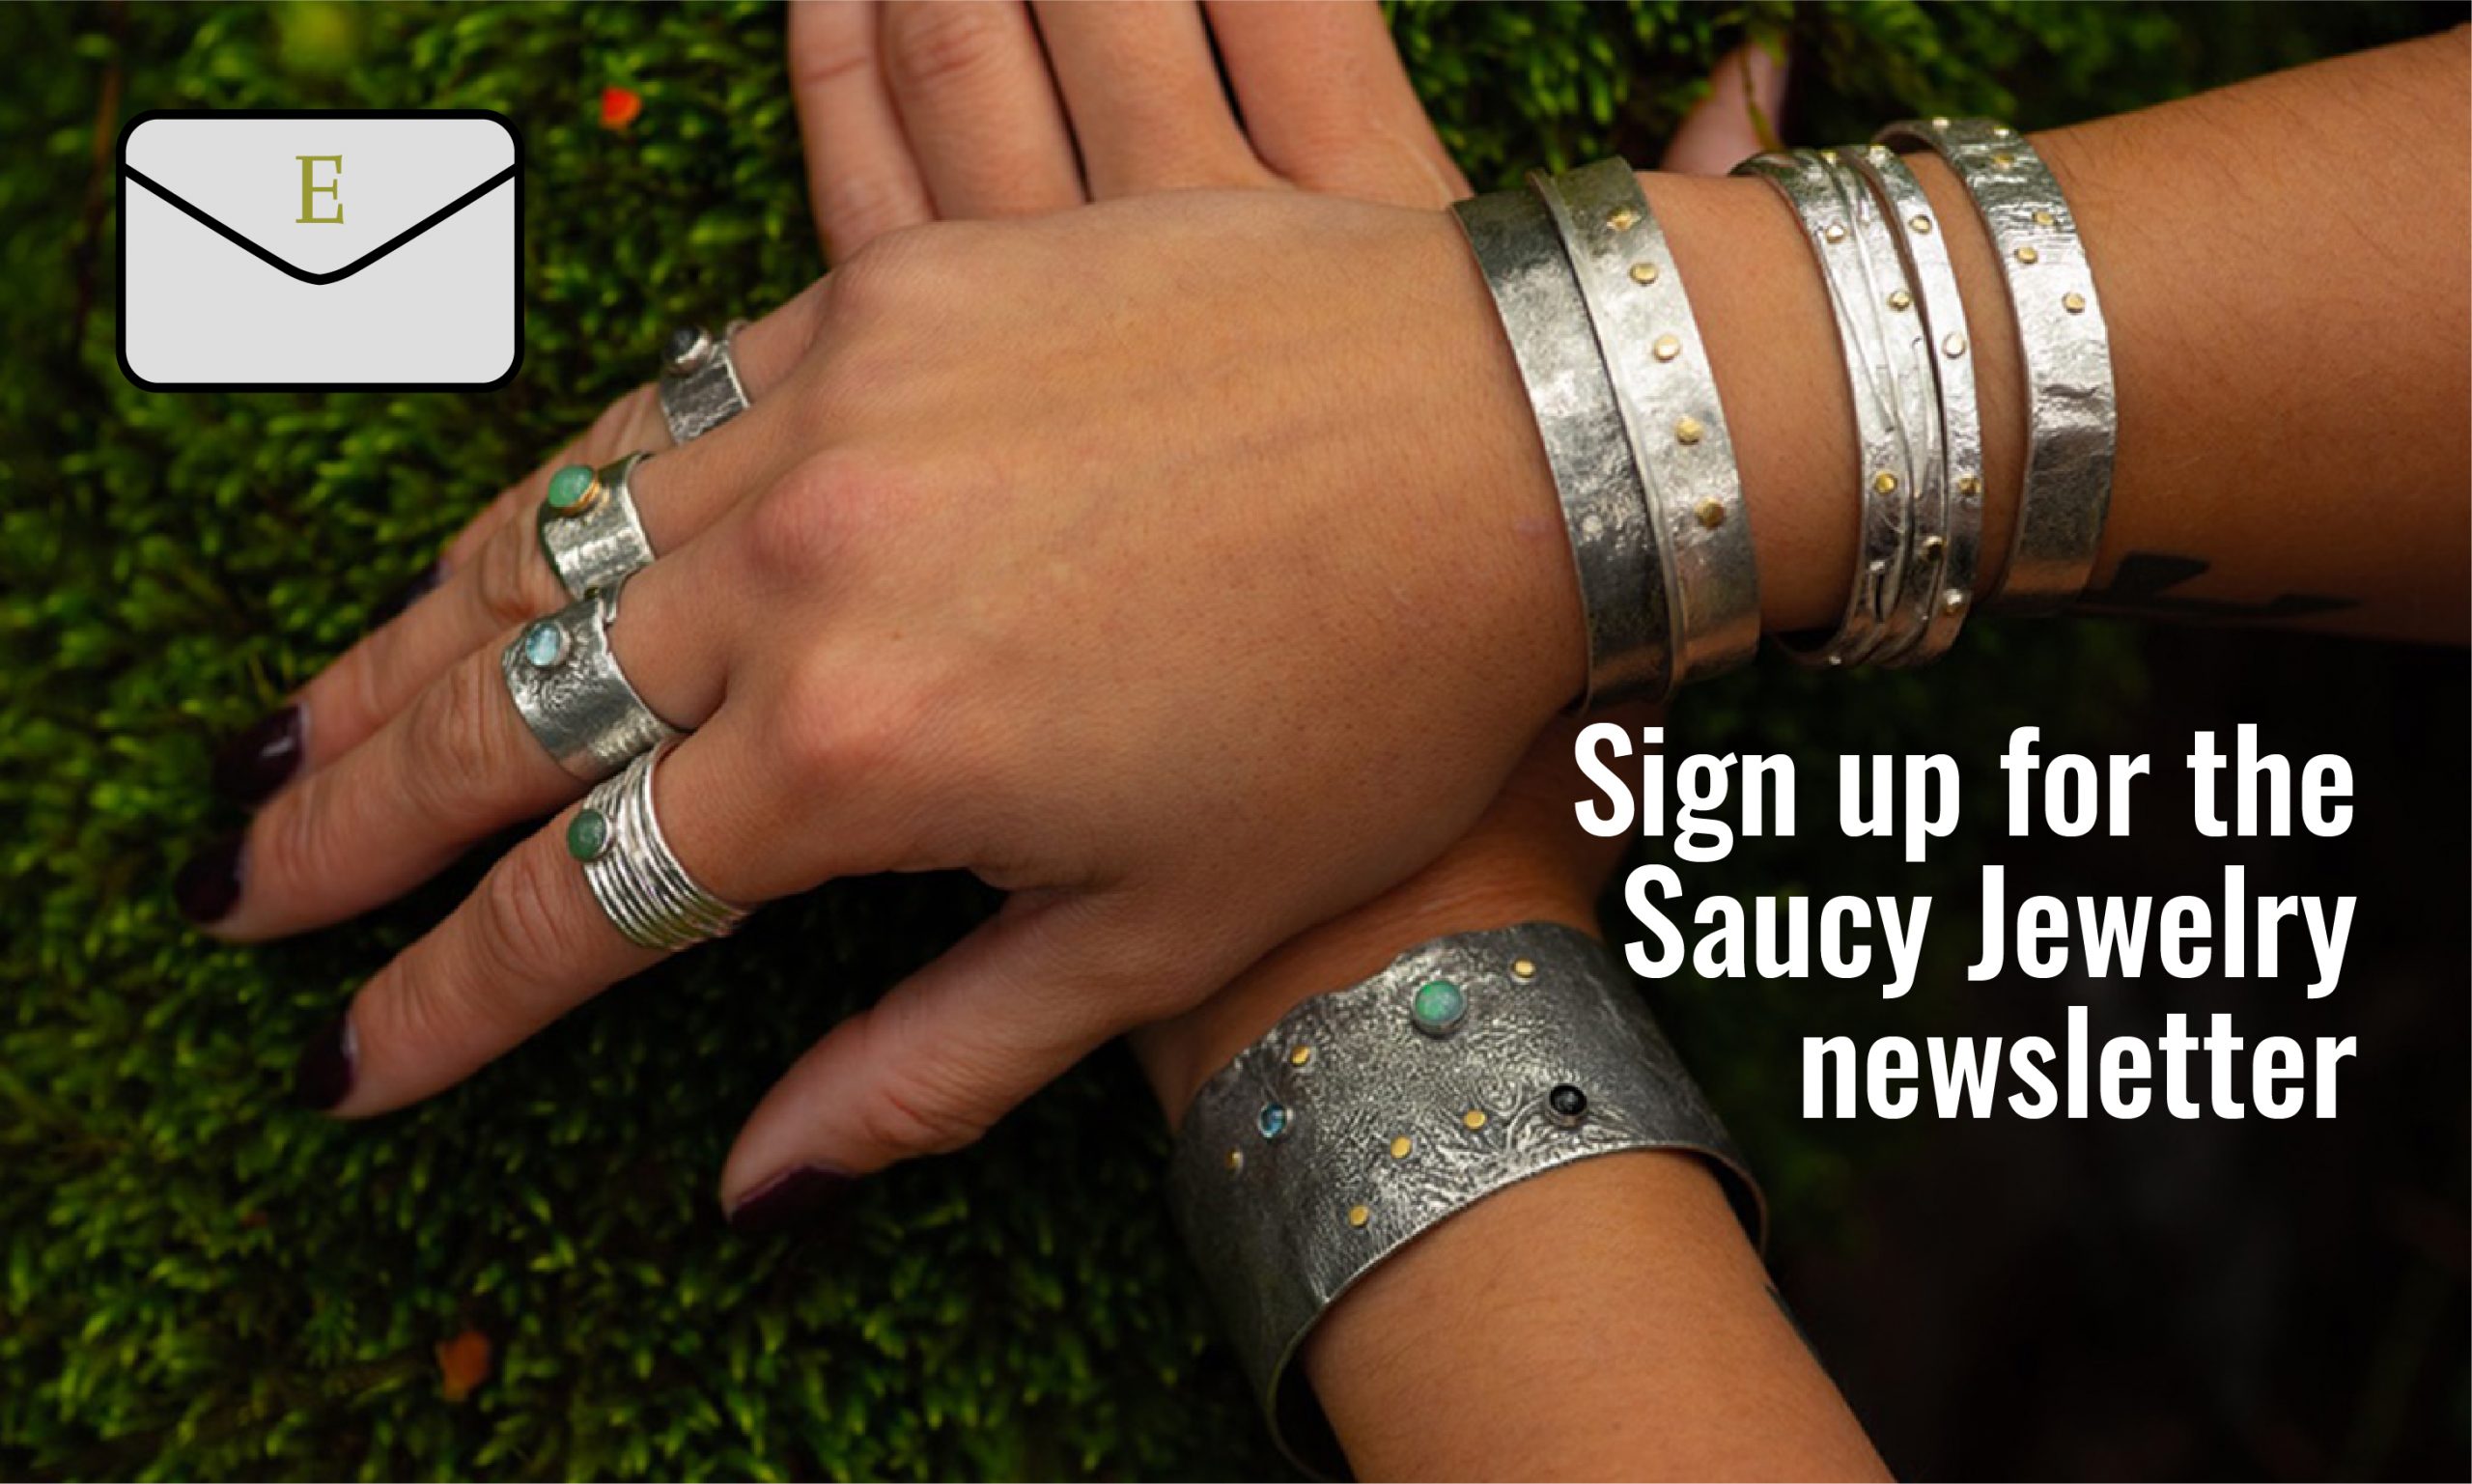 Newsletter signup image with jewelry